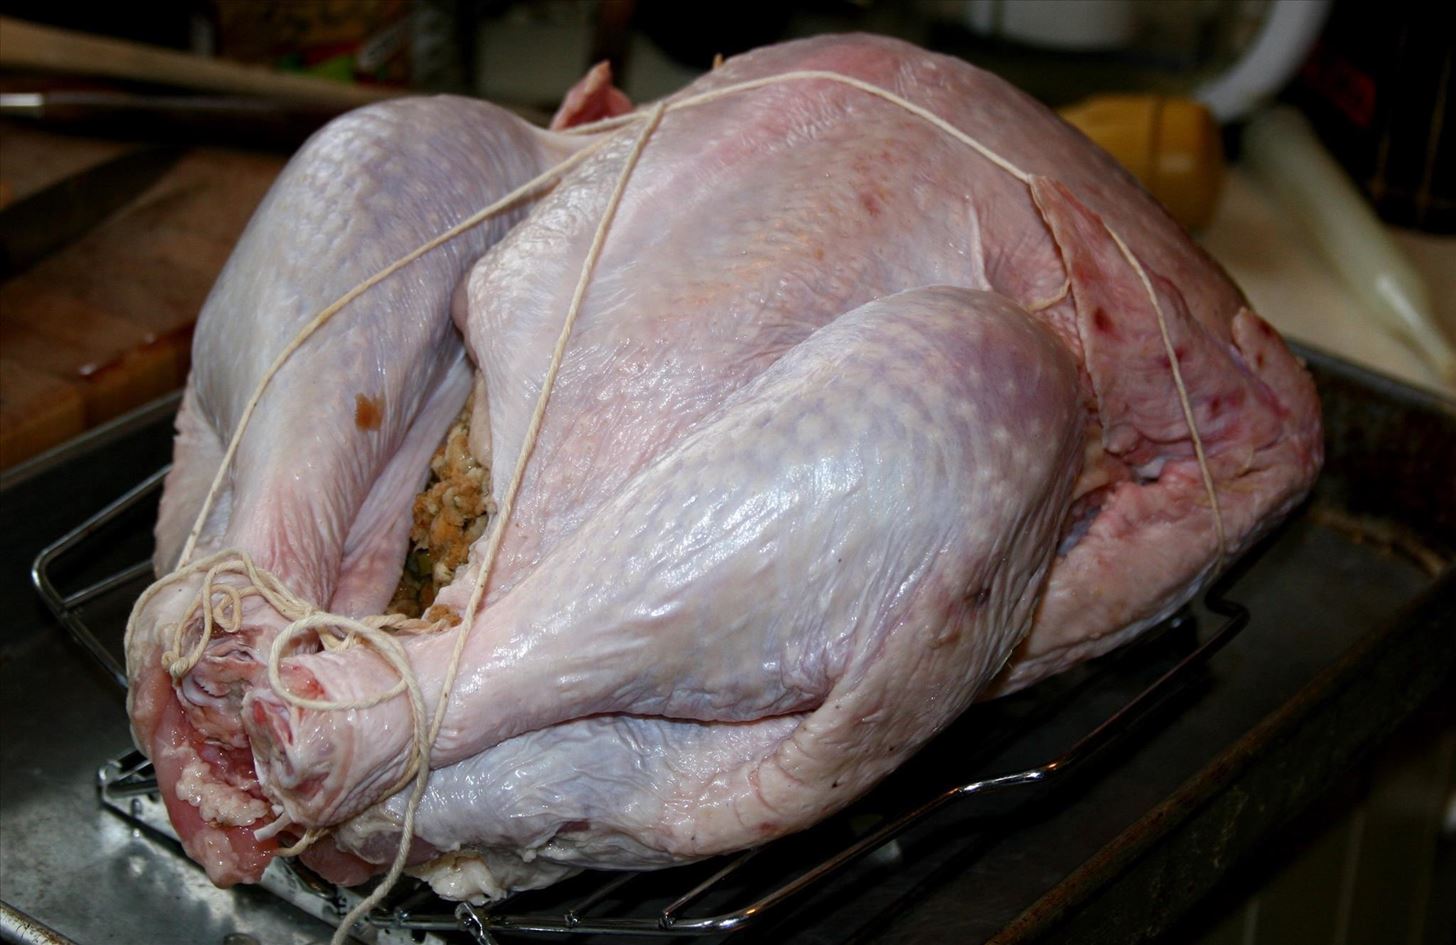 How to Truss a Chicken (Or Any Other Whole Bird) With or Without Any String or Twine